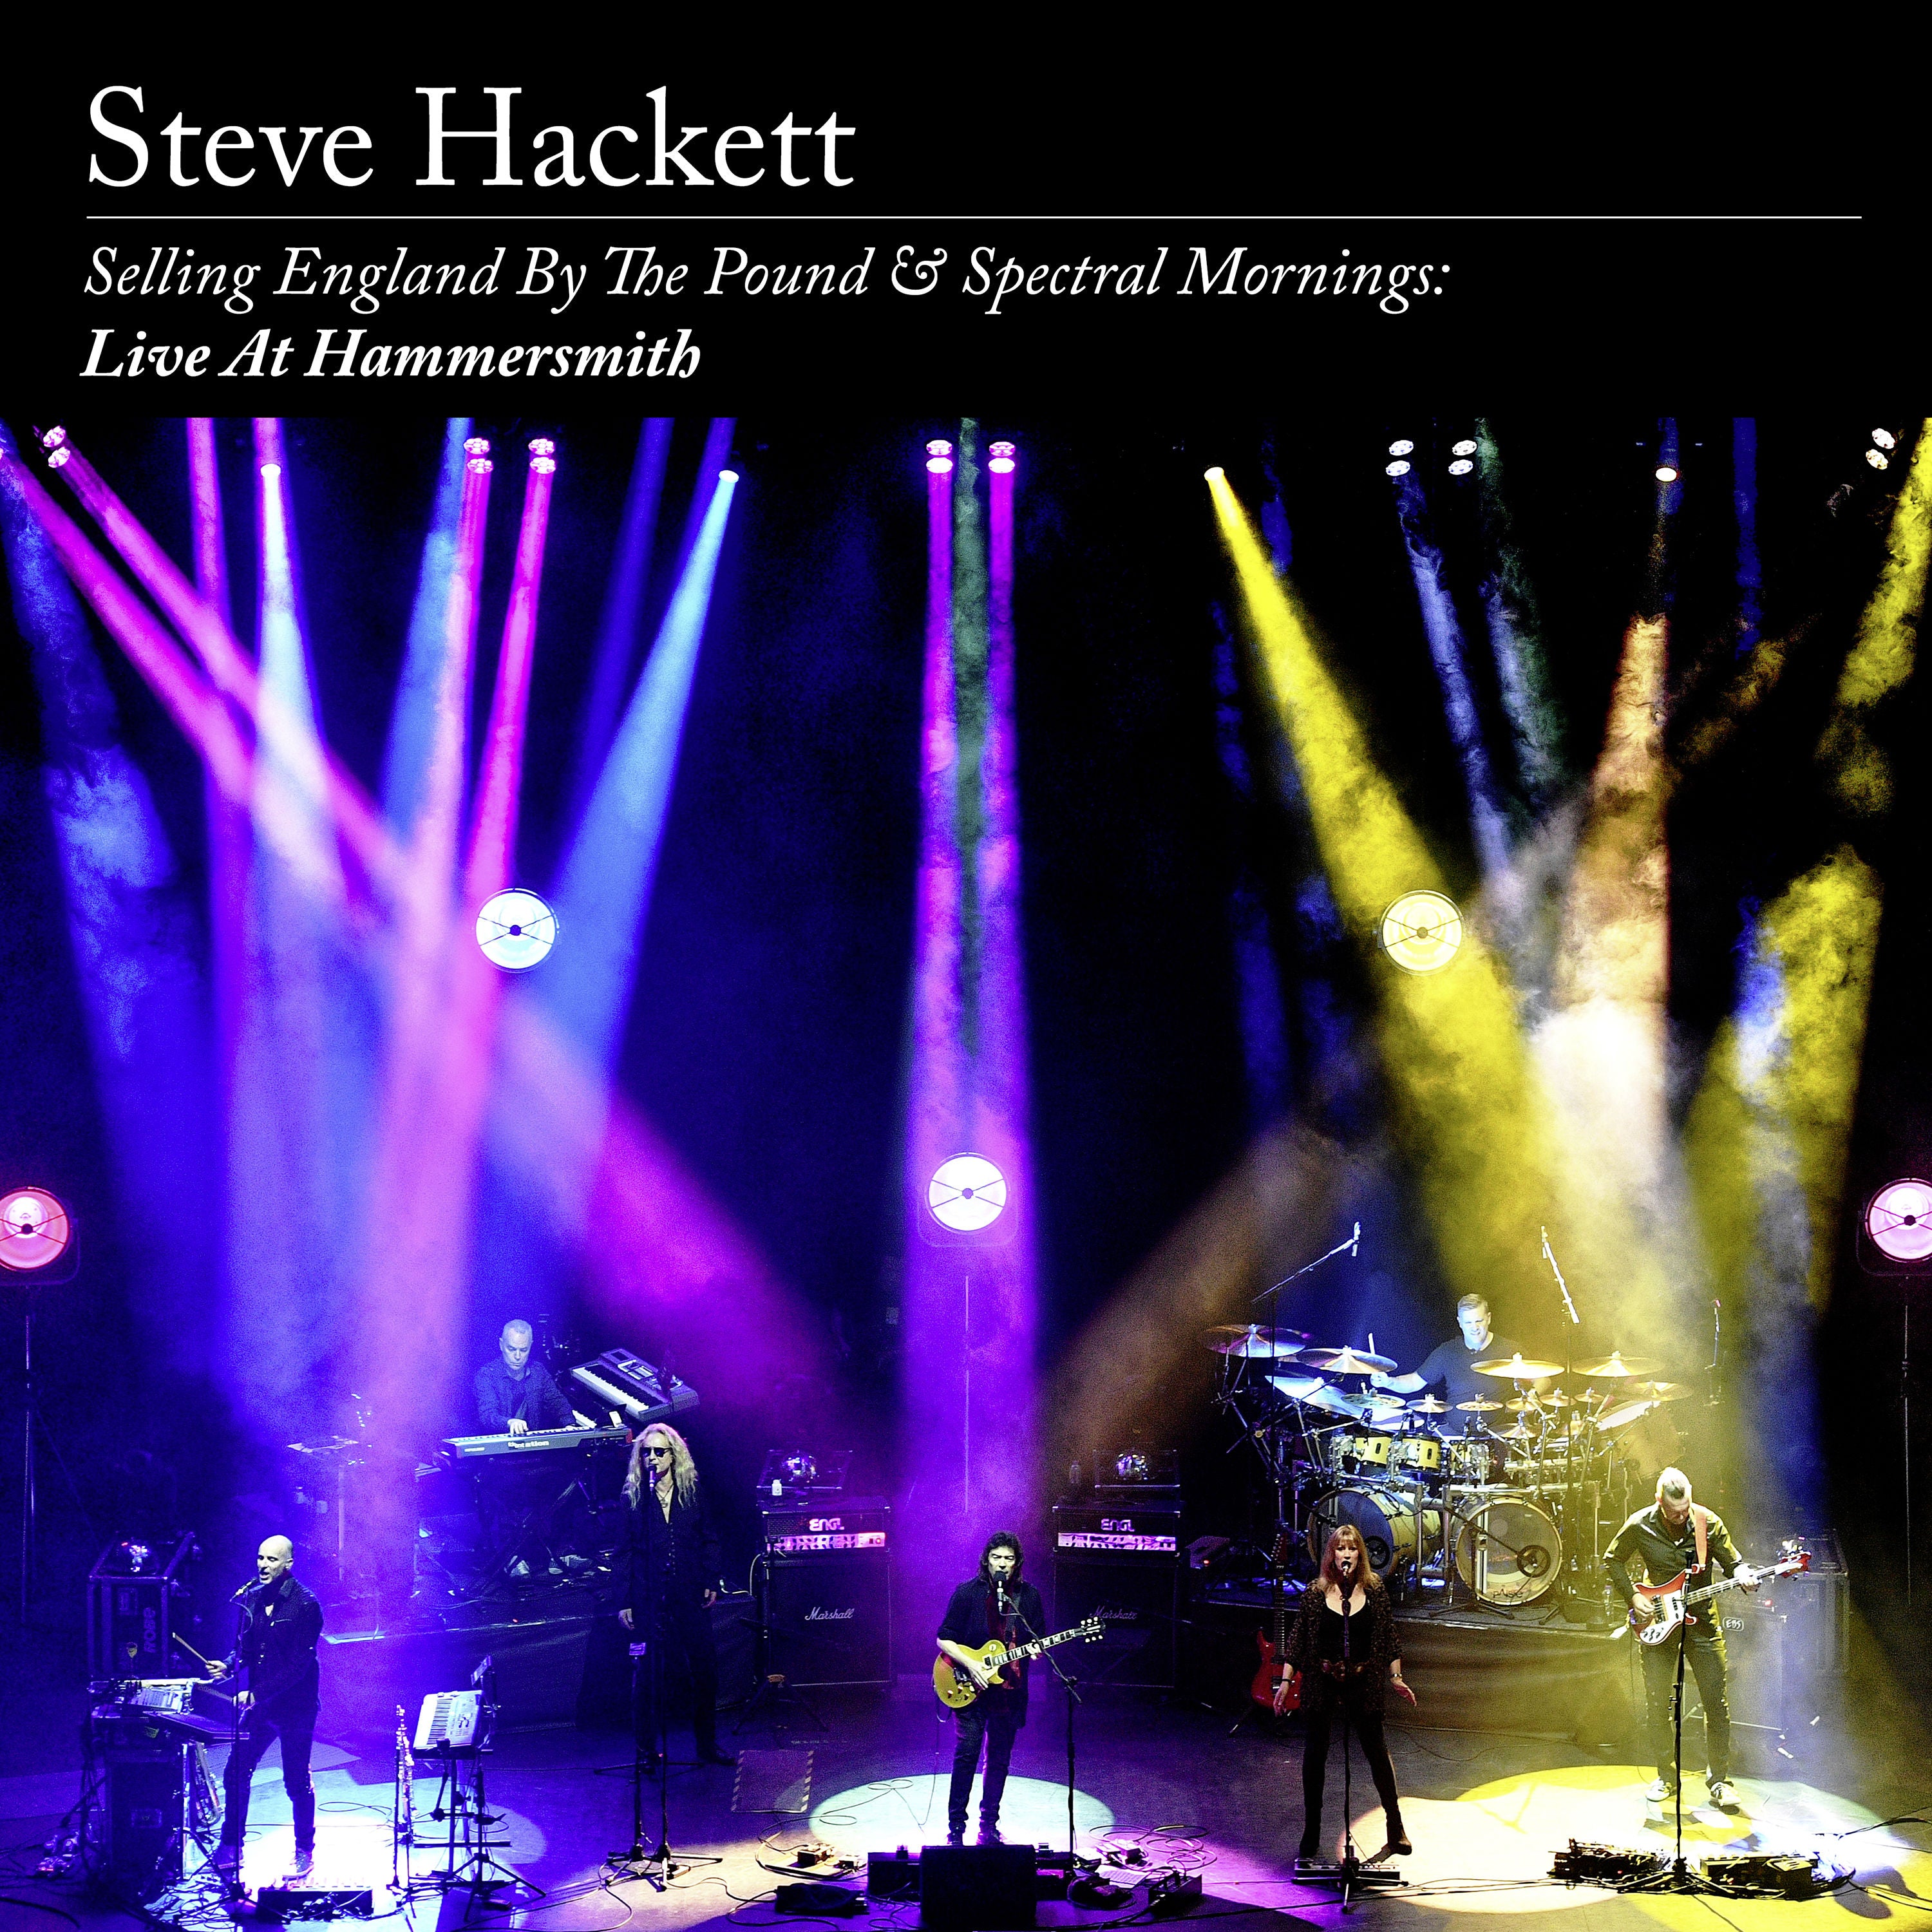 Steve Hackett - Selling England By The Pound & Spectral Mornings, Live At Hammersmith: Limited 2CD + DVD Multibox